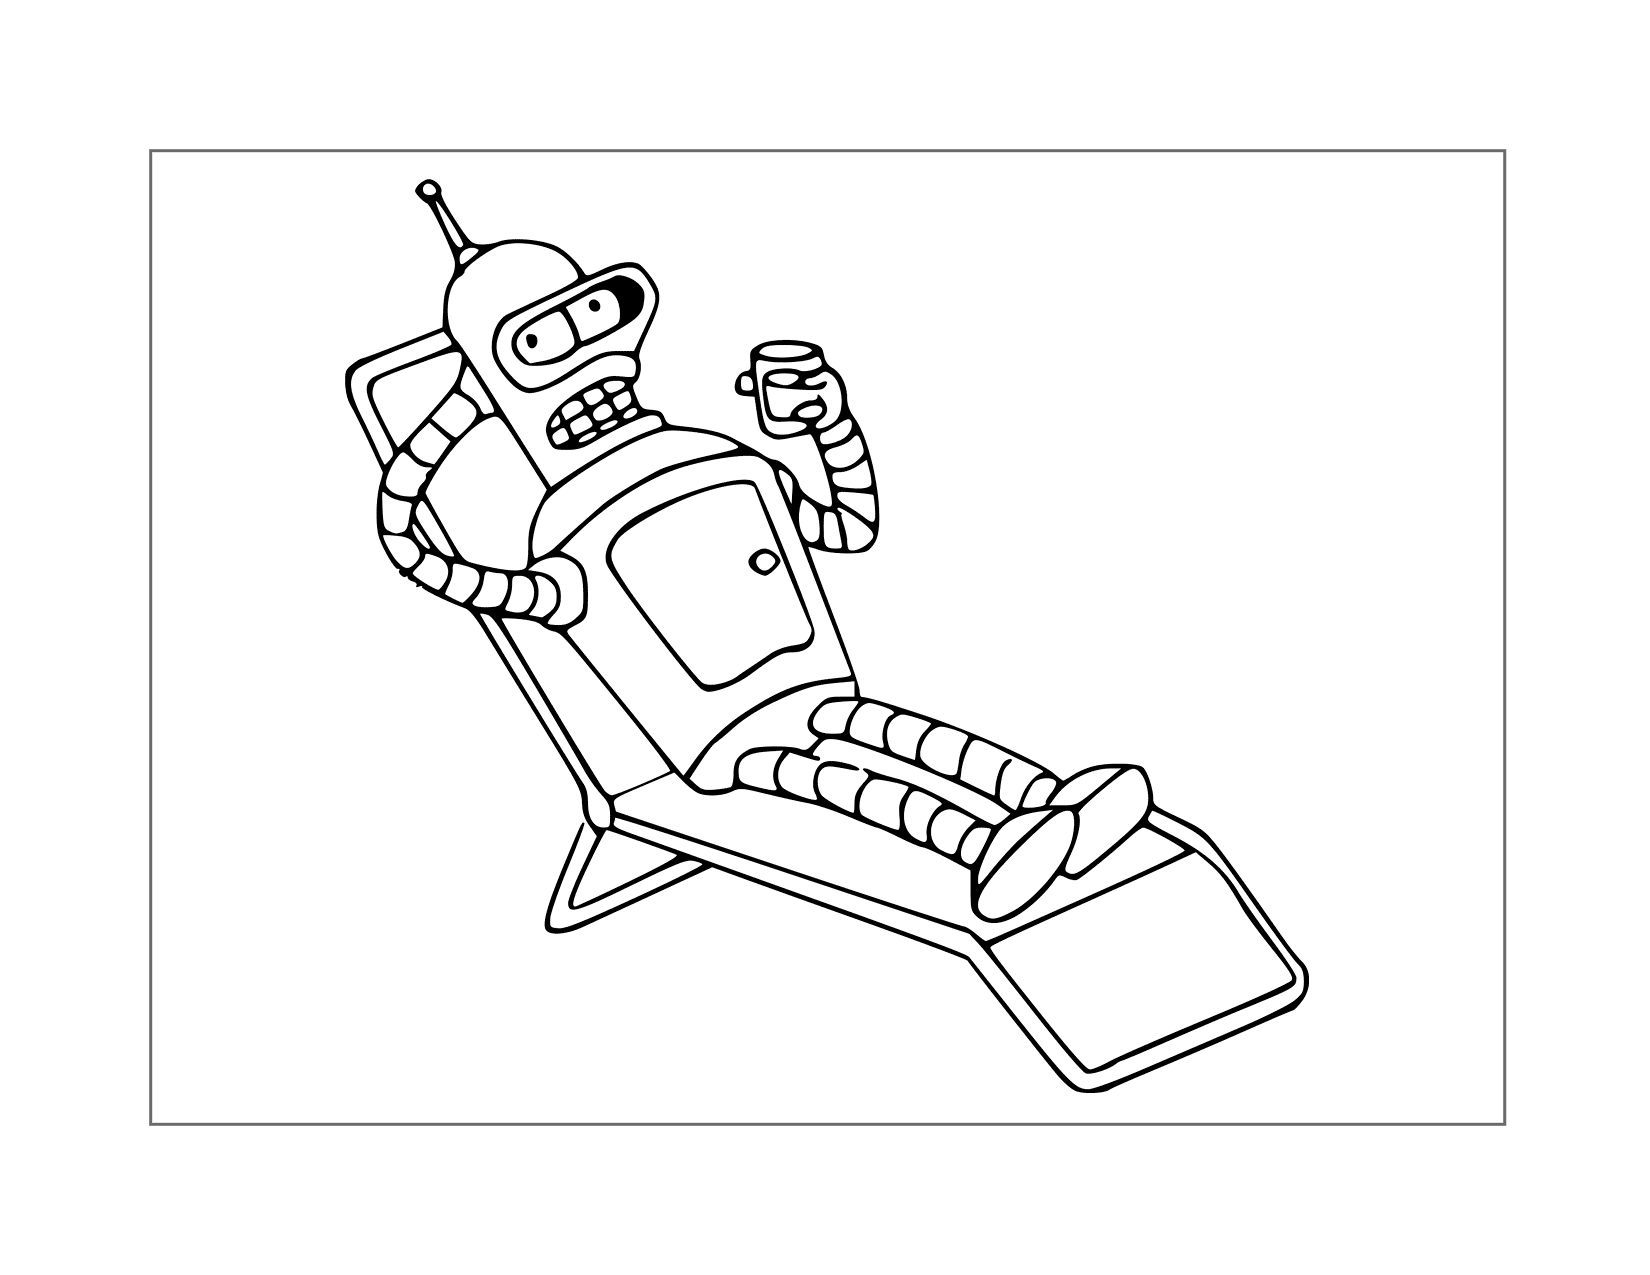 Bender In Lounge Chair Coloring Page